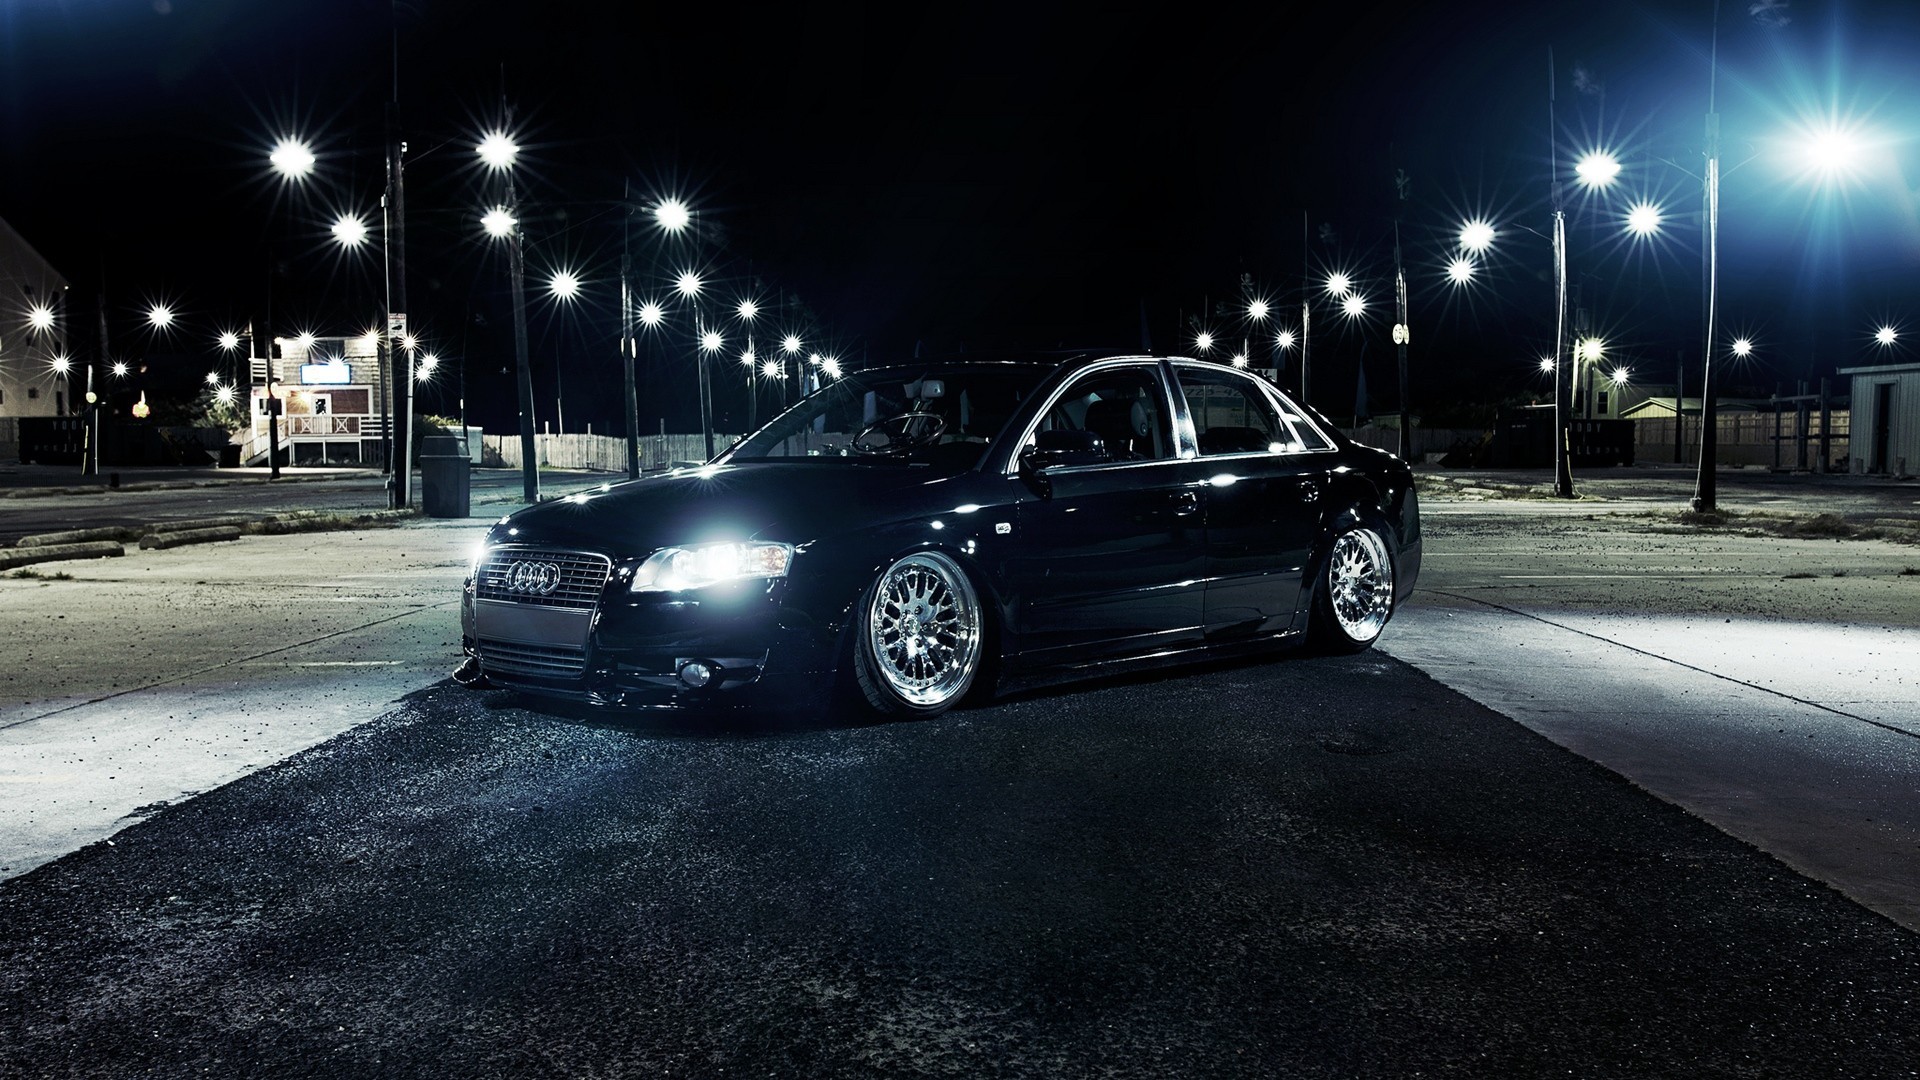 Audi A4 1920×1080 Need #iPhone S #Plus #Wallpaper / #